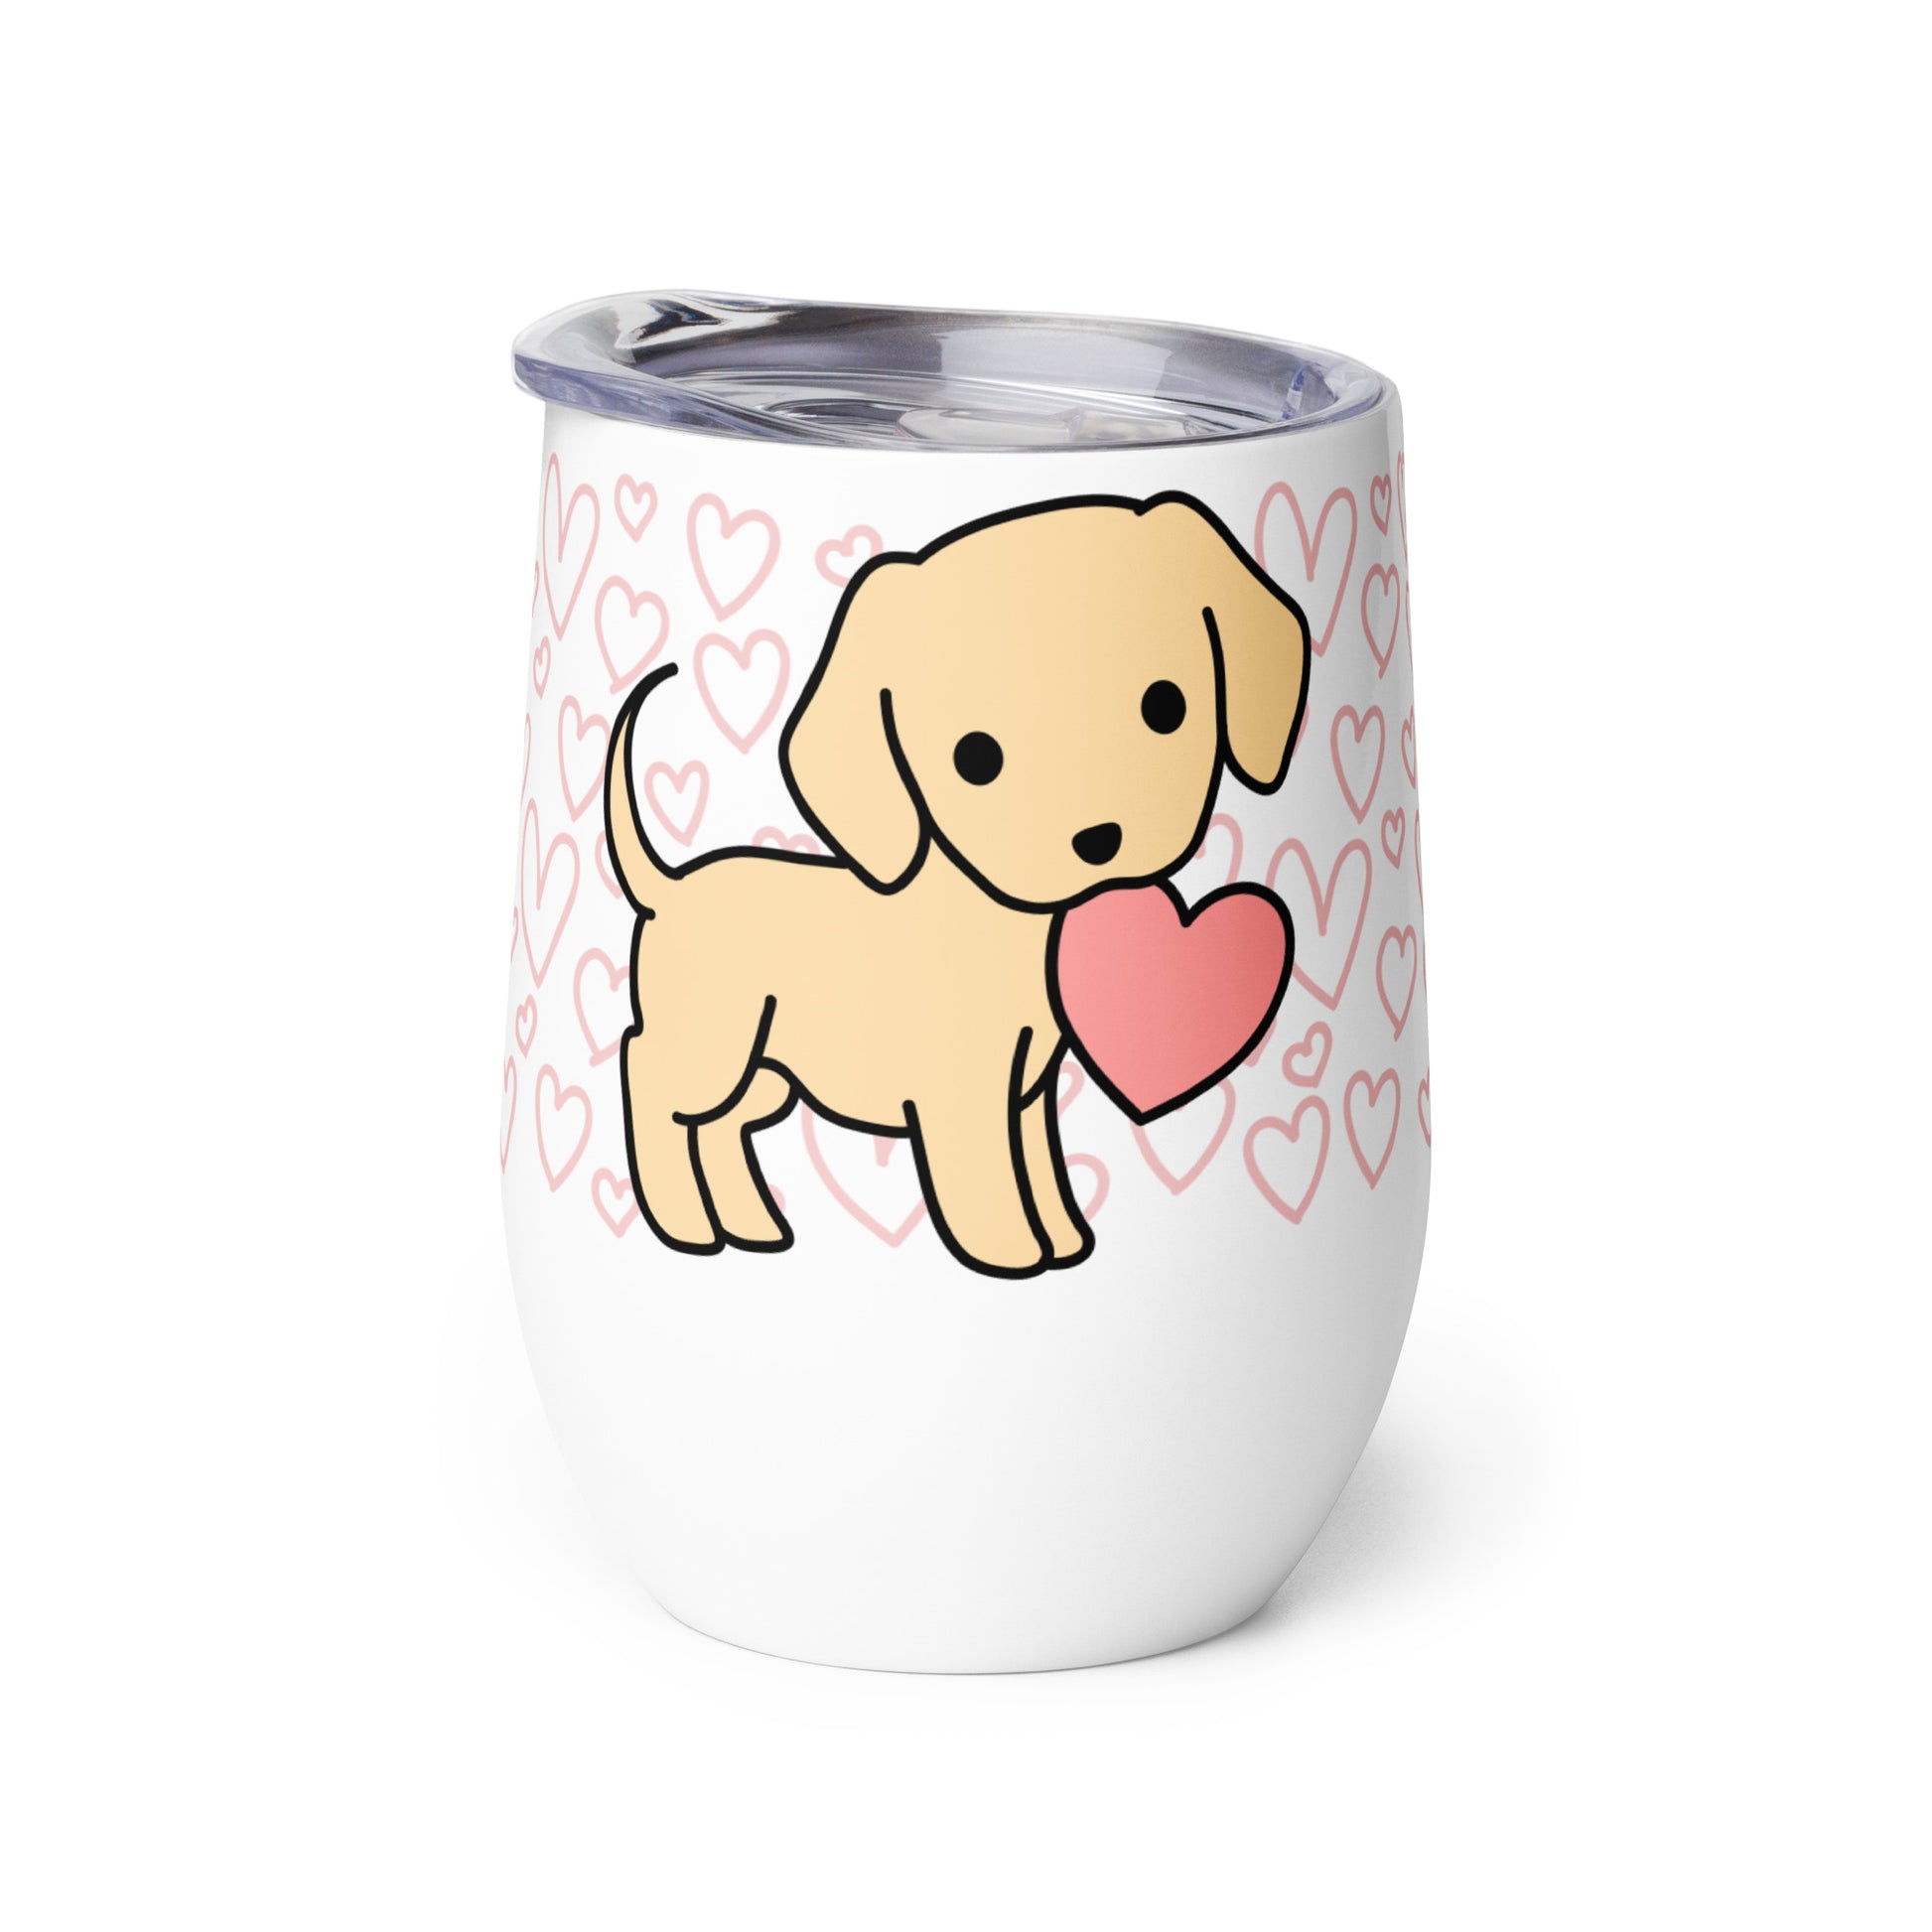 A white metal wine tumbler with a plastic lid. A pattern of hearts wraps around the top half of the tumbler. Centered on the tumbler is a cute, stylized illustration of a Yellow Lab